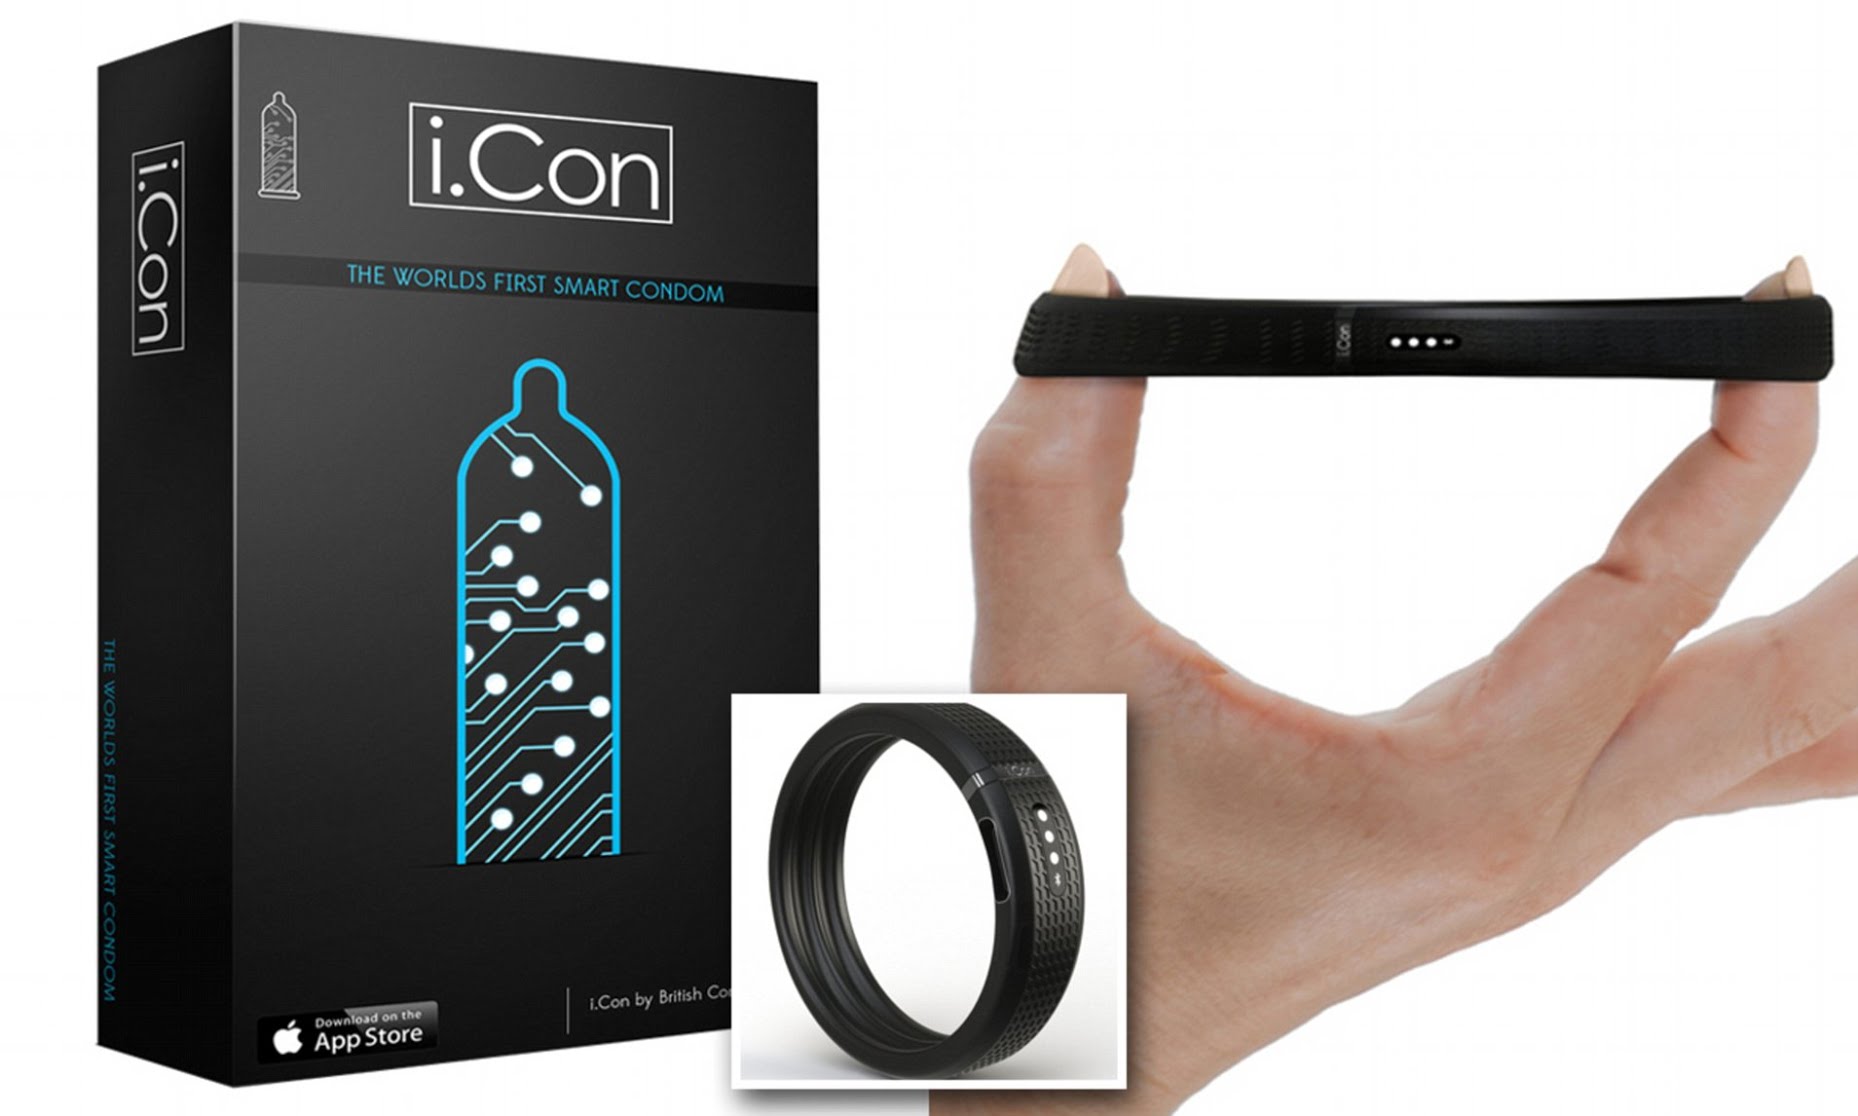 World's First Smart Condom that Detects STDs and Rate Men's Sexual Performance